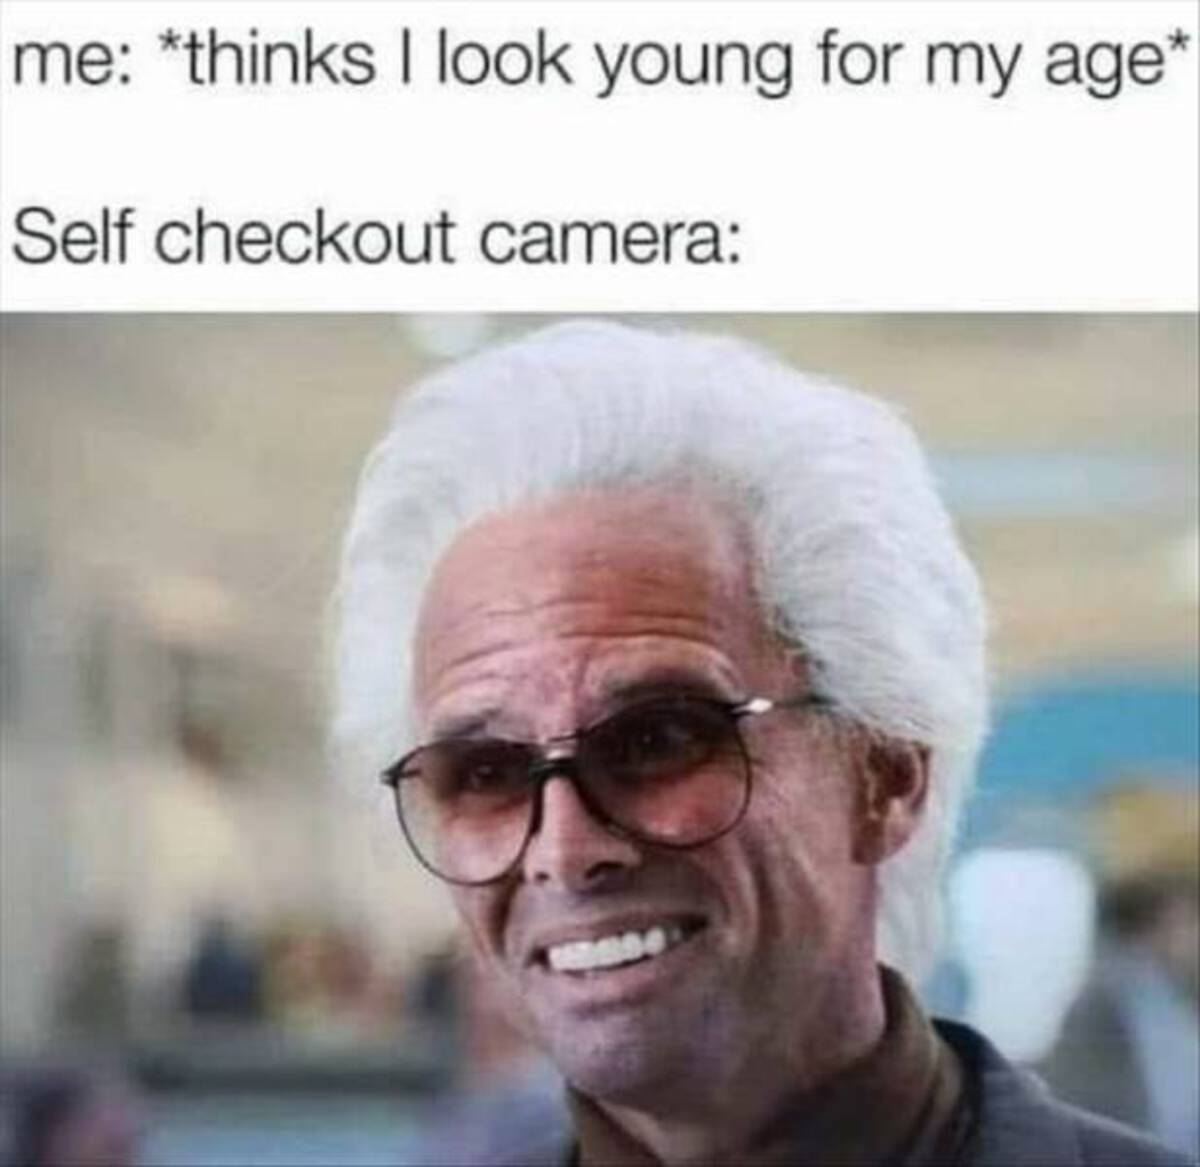 photo caption - me thinks I look young for my age Self checkout camera